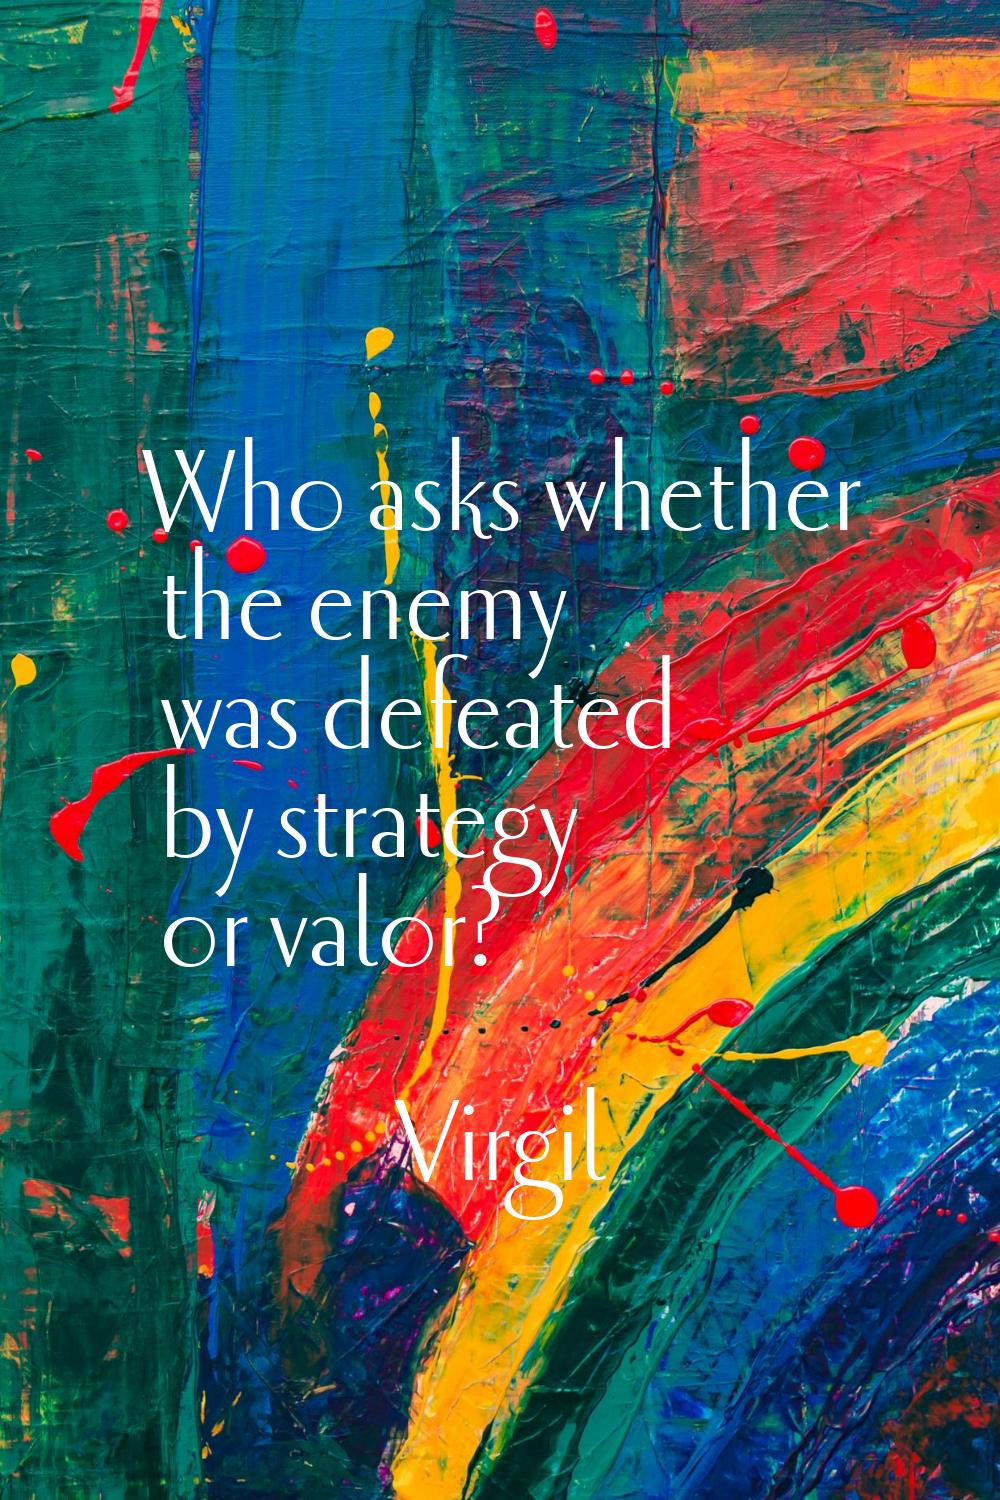 Who asks whether the enemy was defeated by strategy or valor?